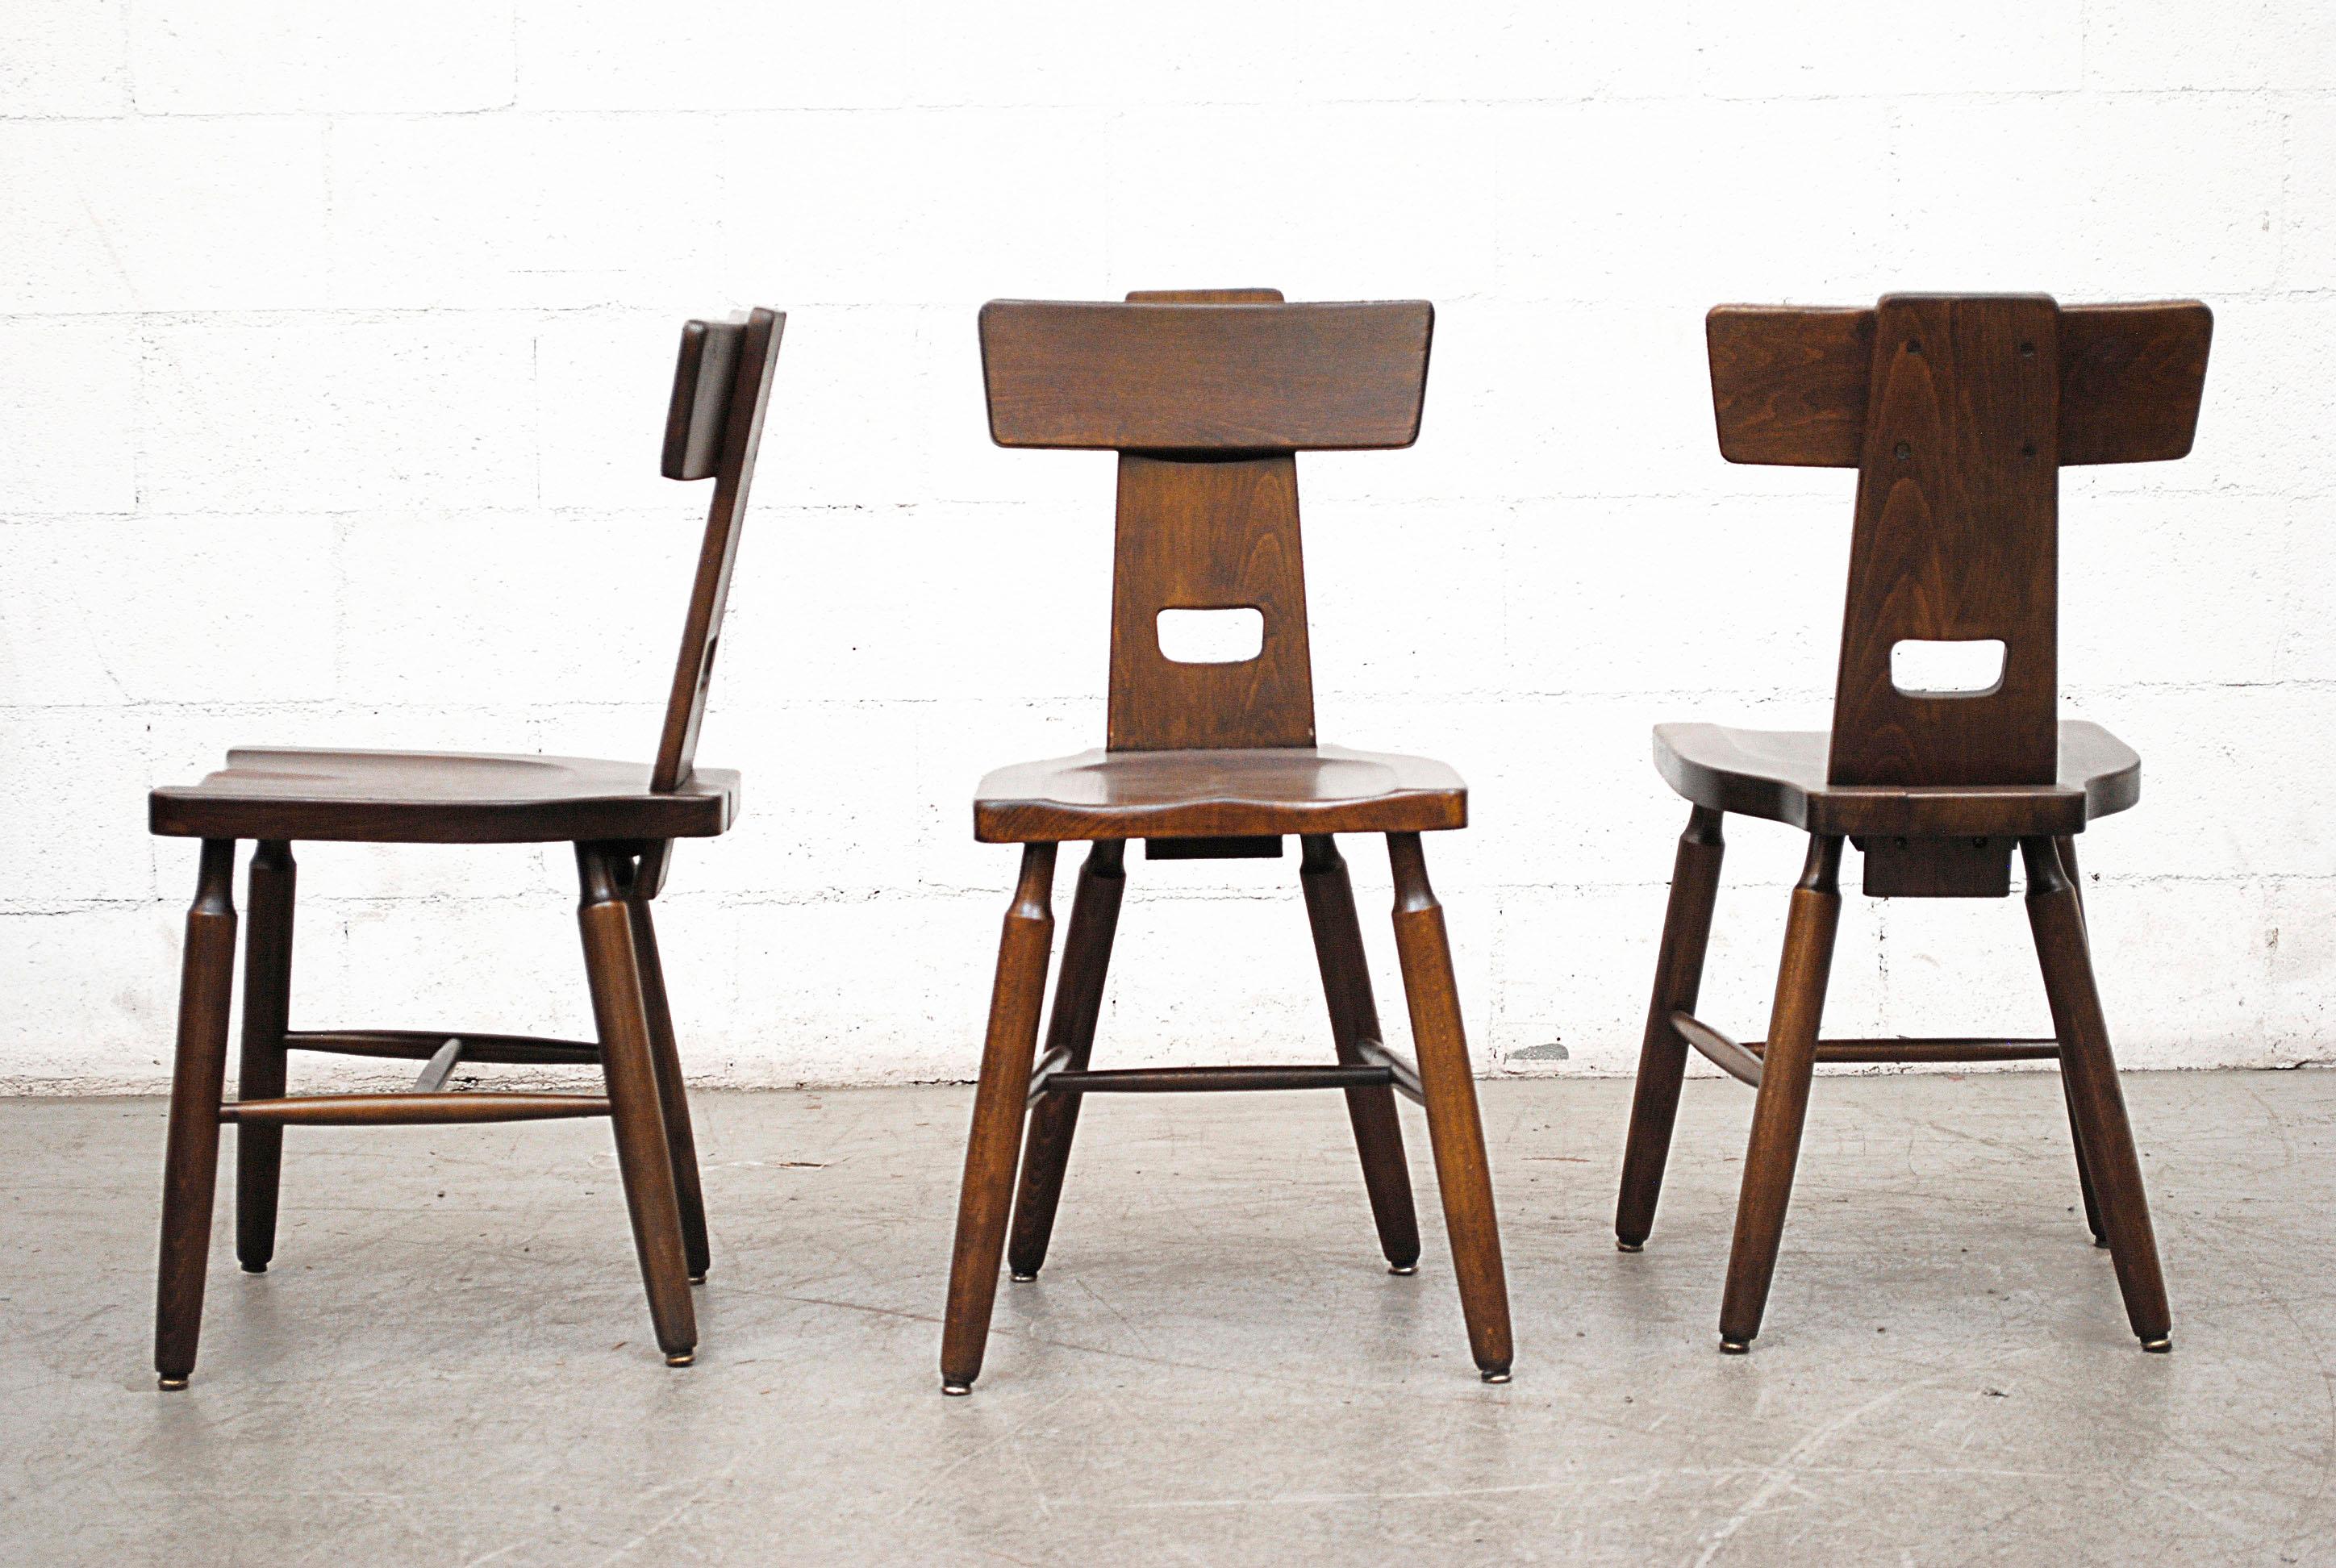 Set of Six Brutalist T-Back dining chairs inspired by Pierre Chapo. Lightly refinished dark oak plank dining chairs. Good original condition. Set price. 15 more available and listed separately (LU922414634072).